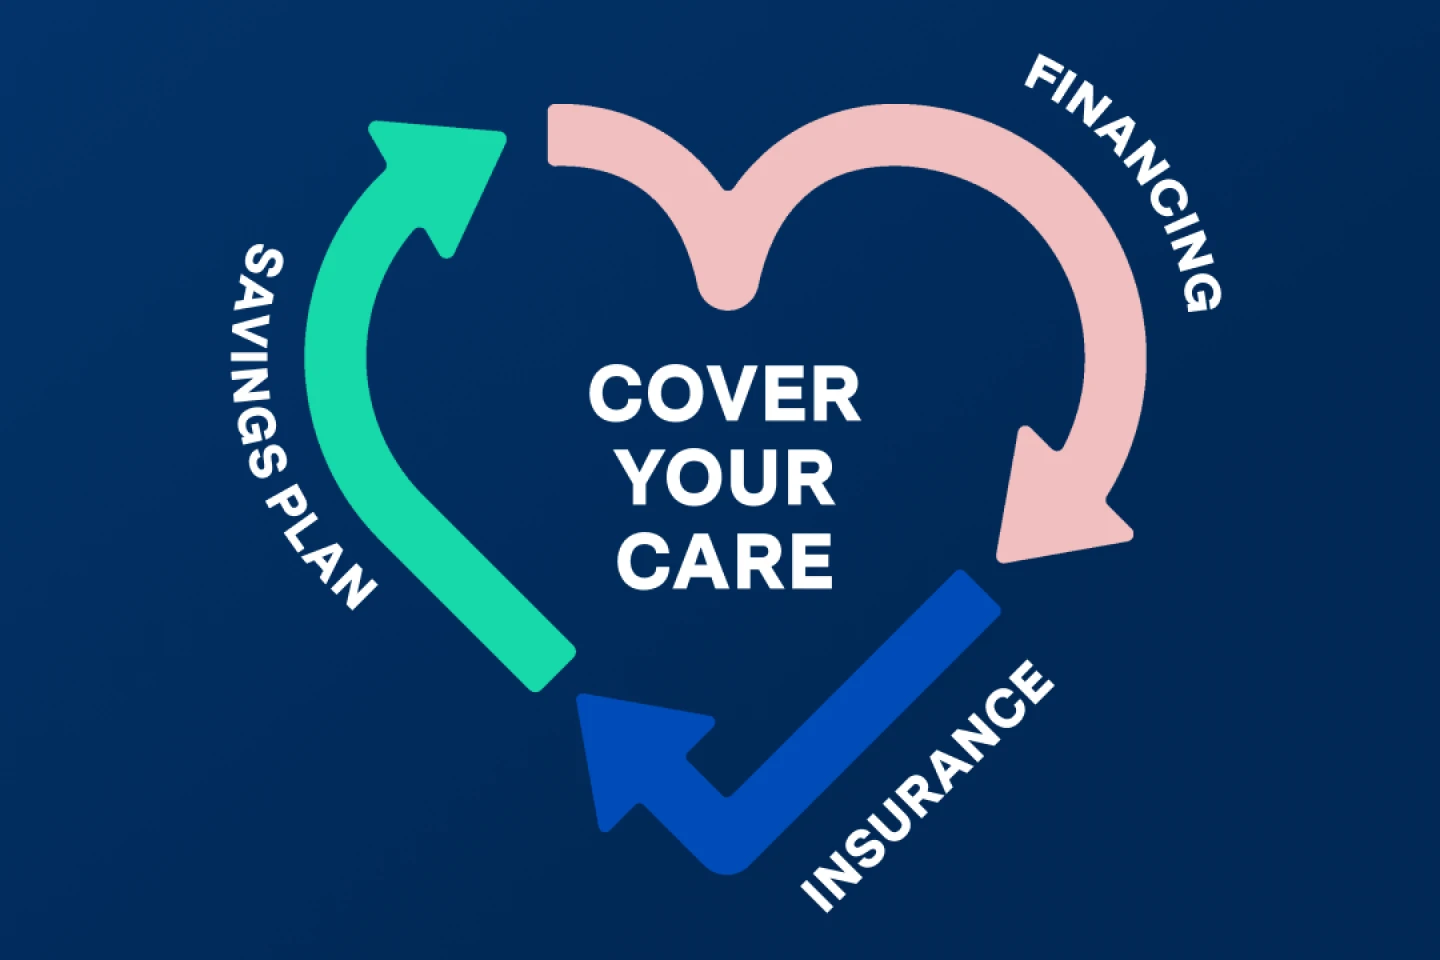 Graphic of a heart with arrows labeled Savings Plan, Financing, Insurance around Cover Your Care text on a navy background.